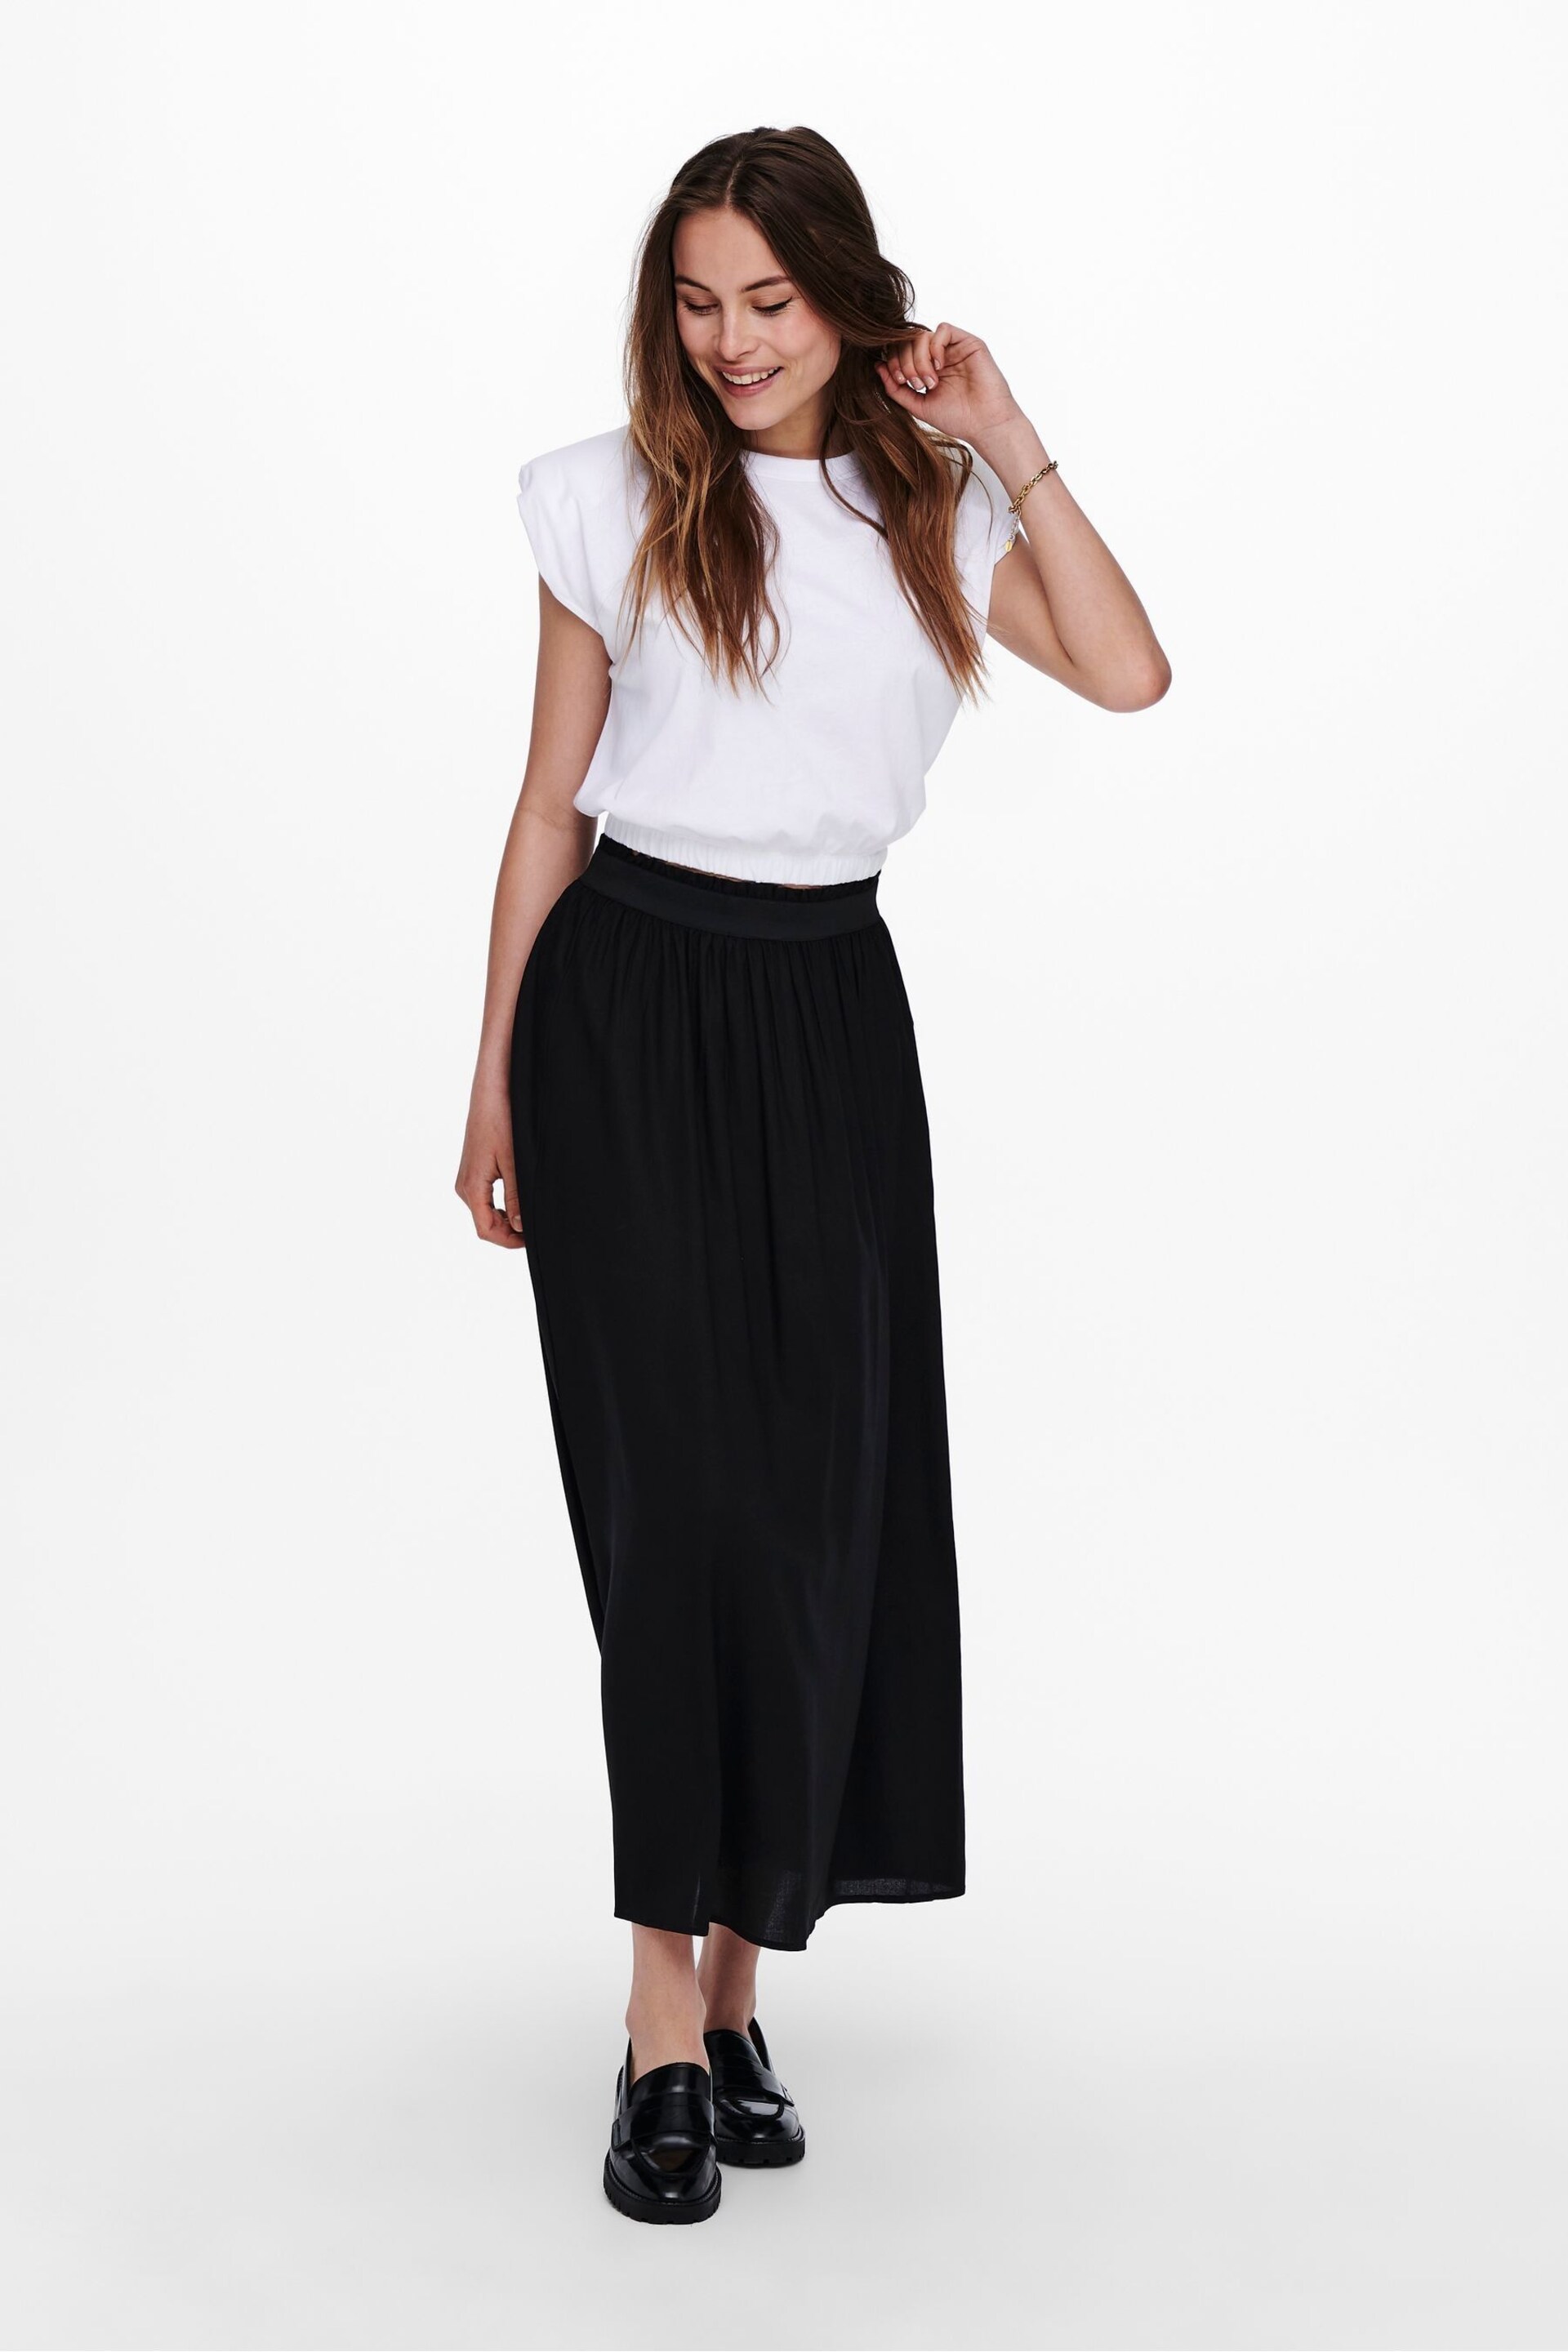 ONLY Black Jersey Midi Skirt - Image 2 of 7